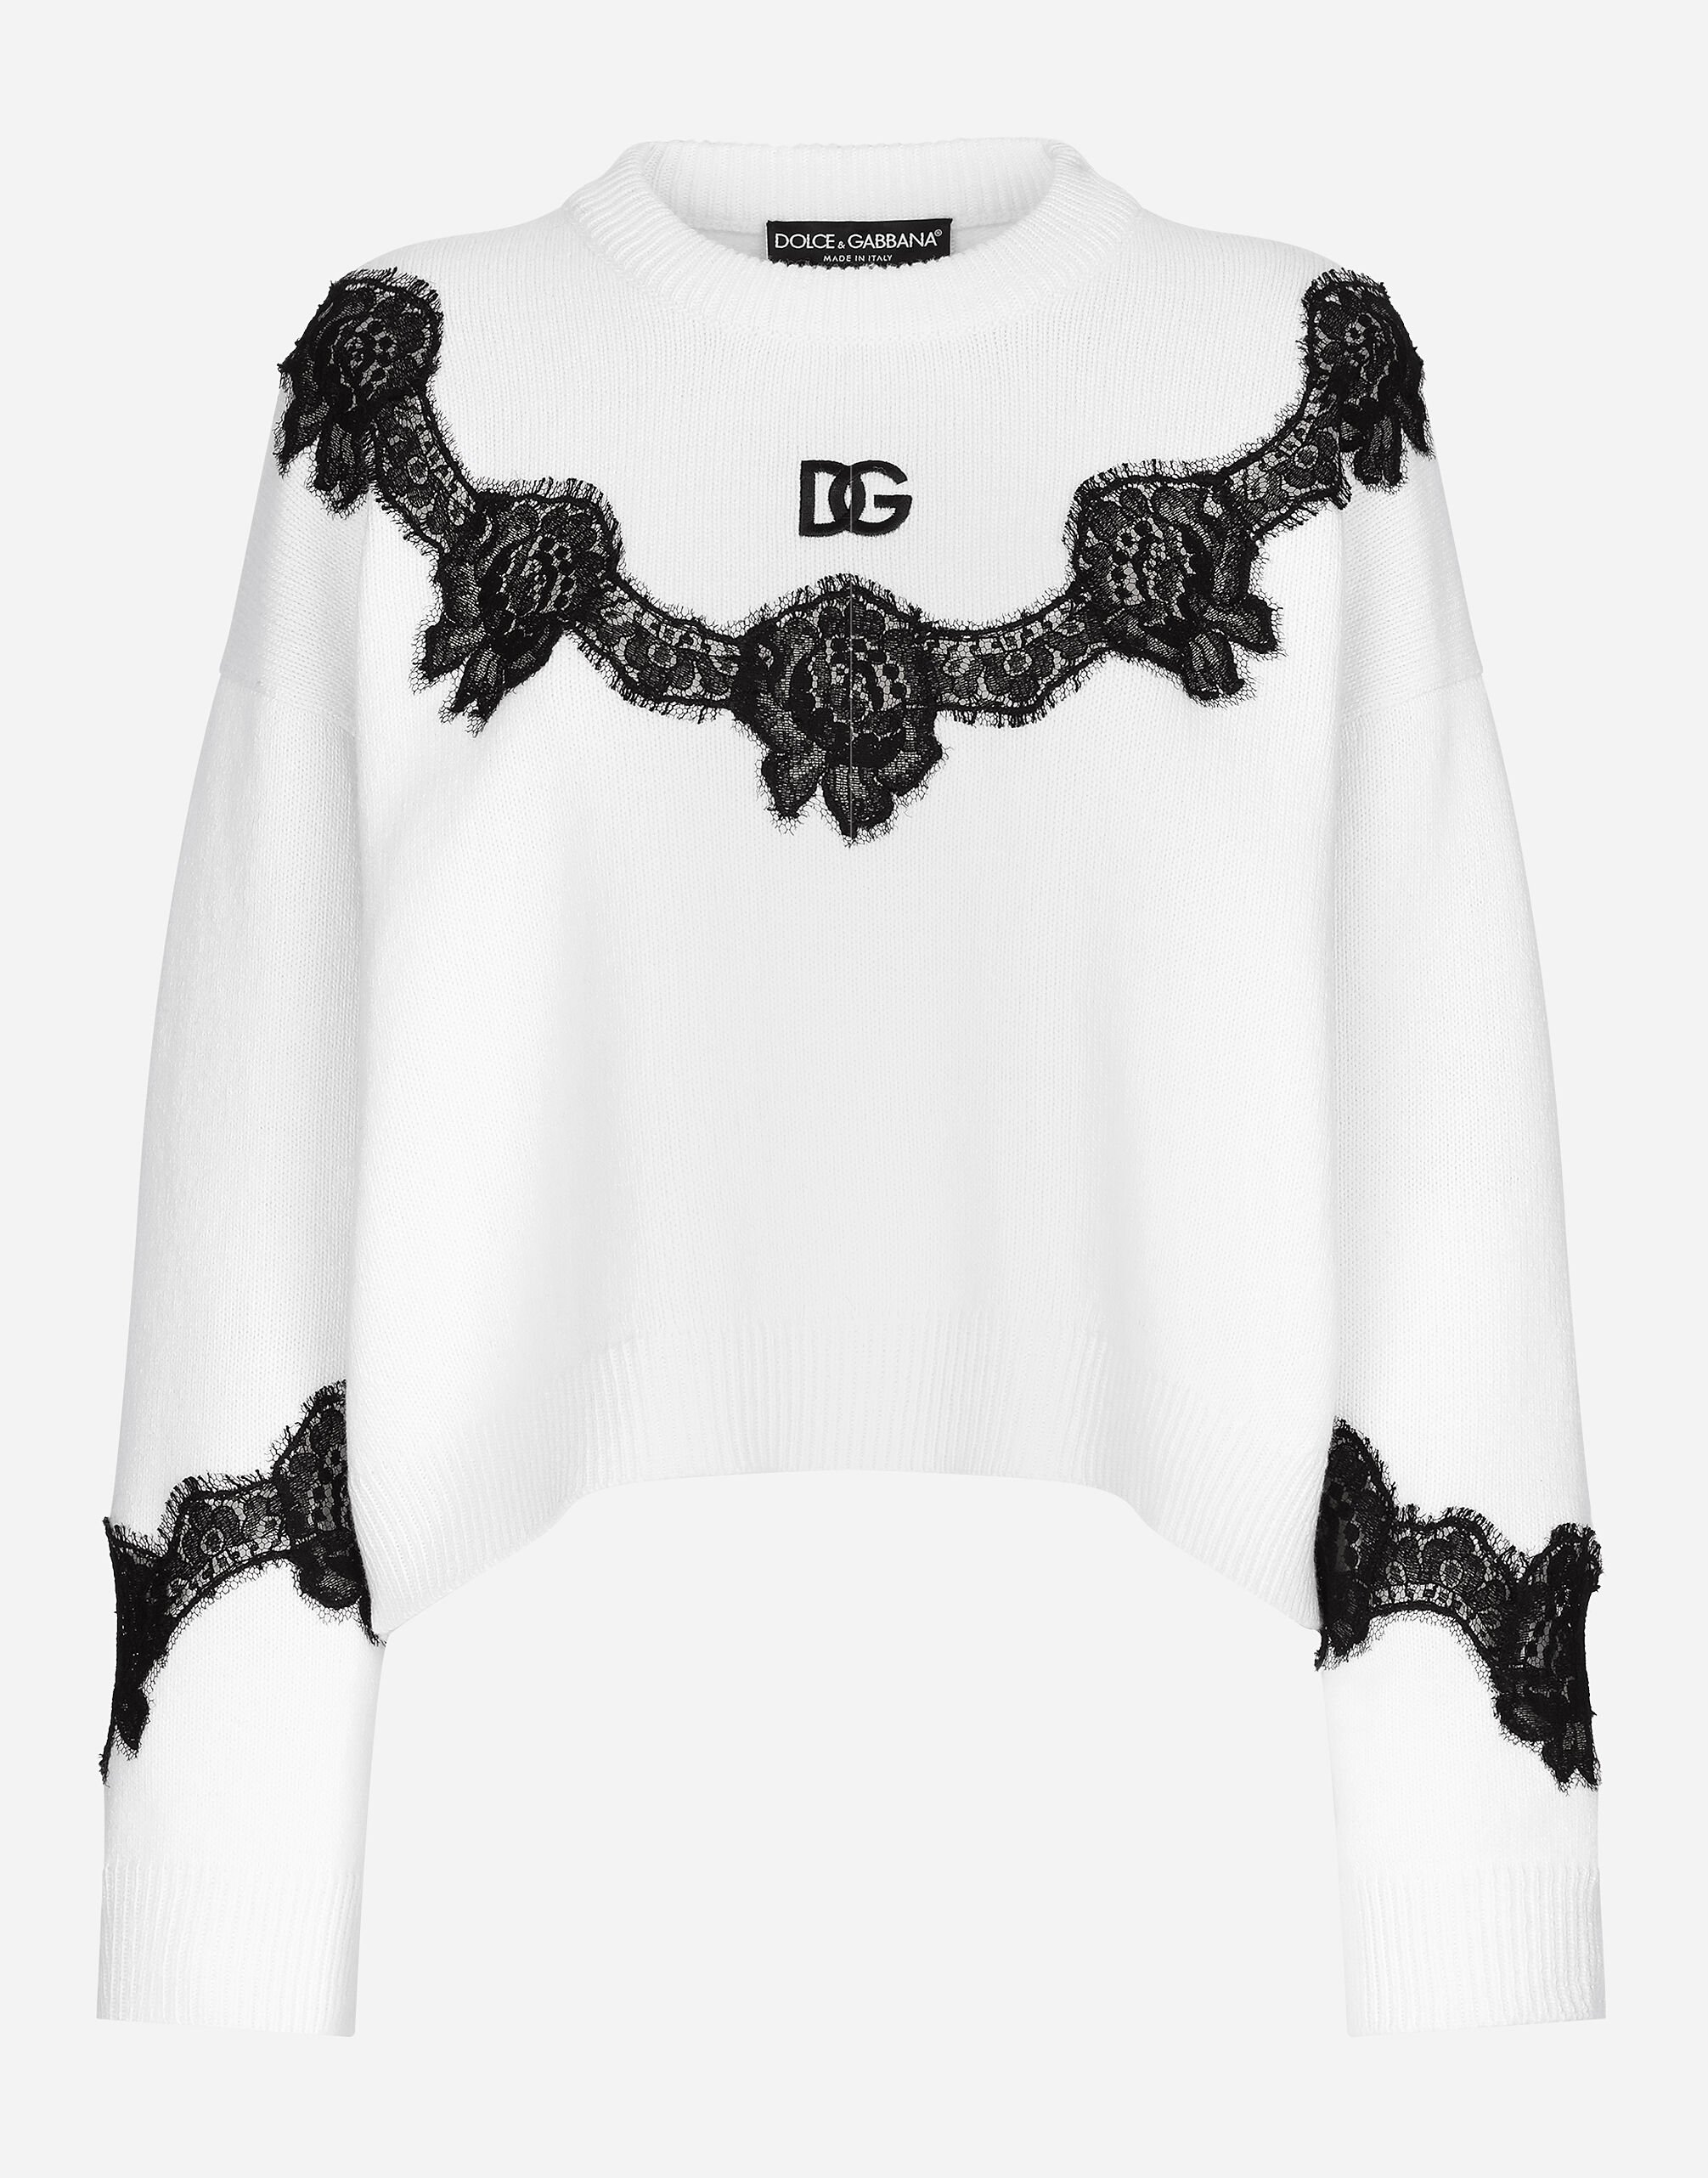 Dolce & Gabbana Wool sweater with DG logo and lace inserts Green FXZ01ZJBSHY